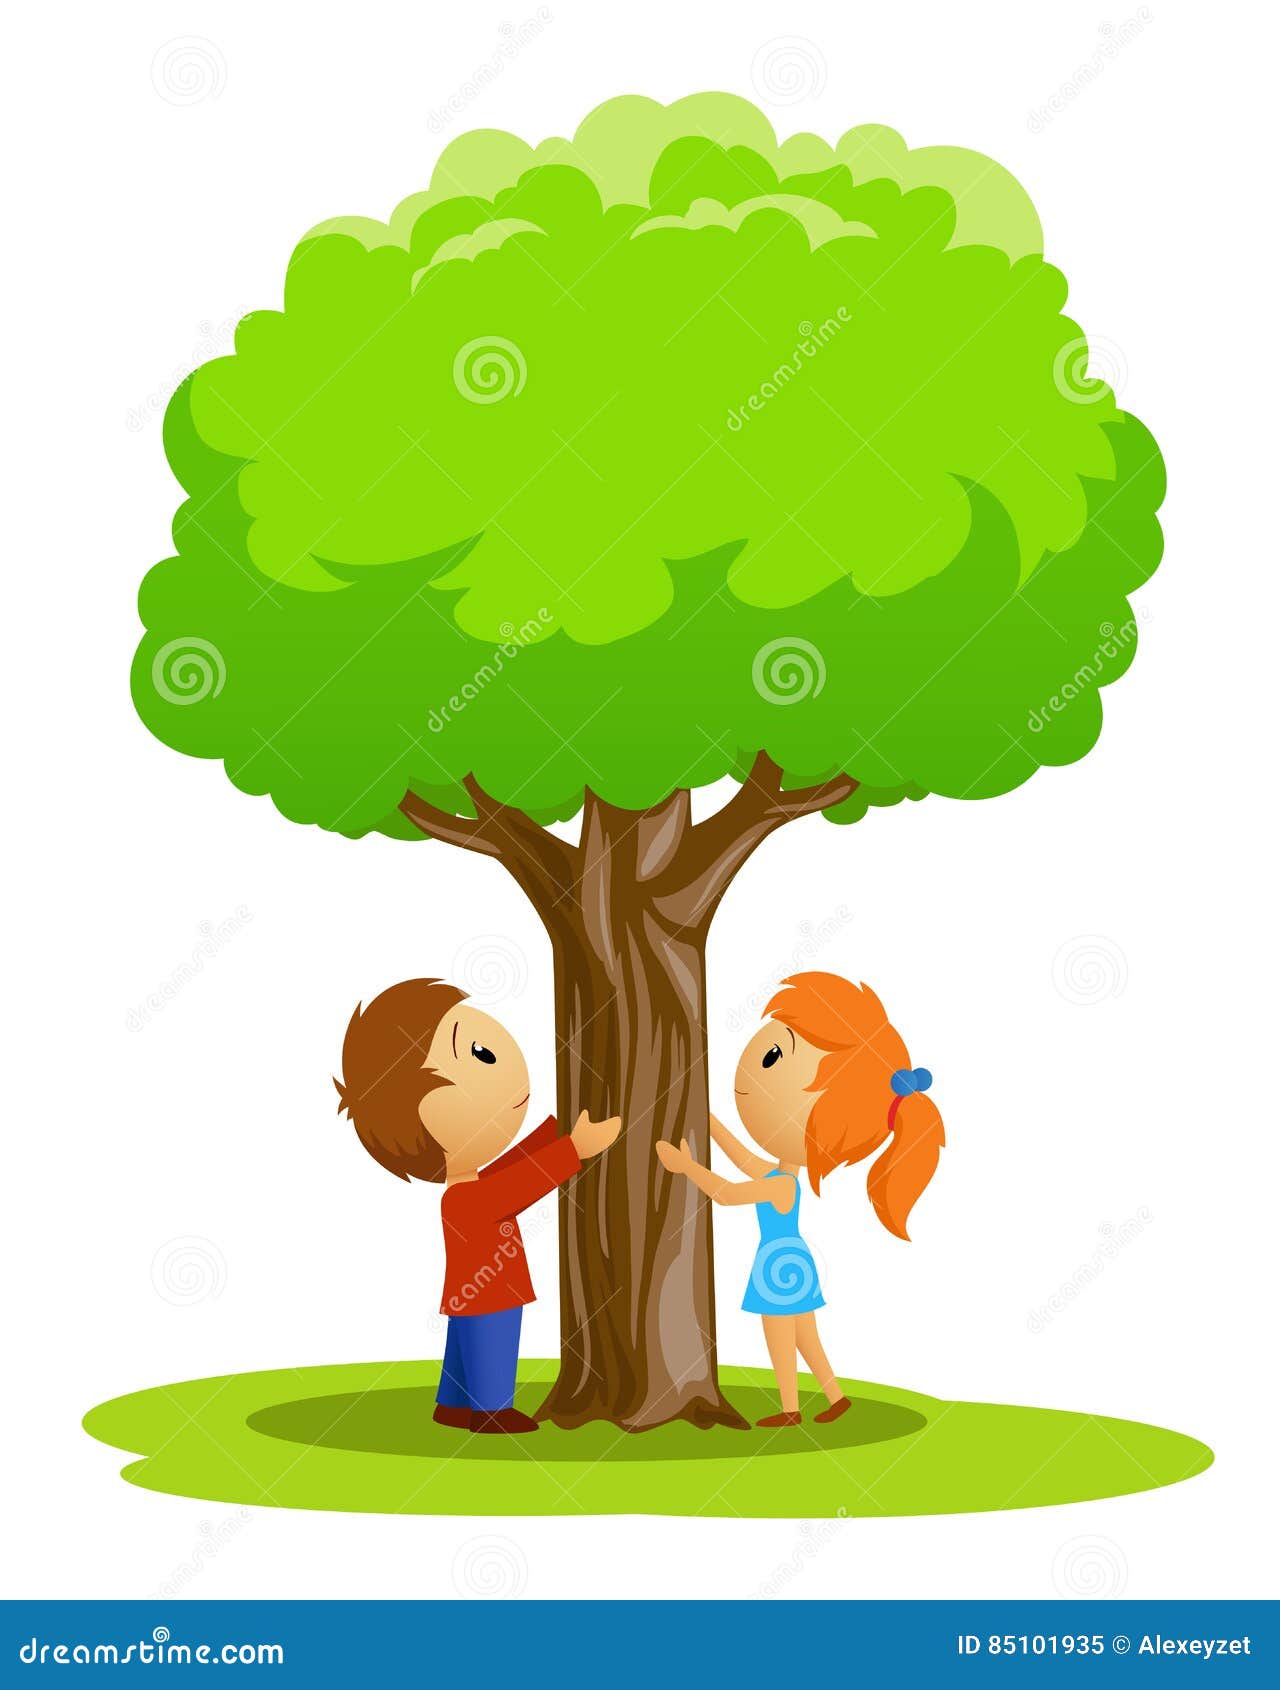 cartoon place with boy and girl touched tree